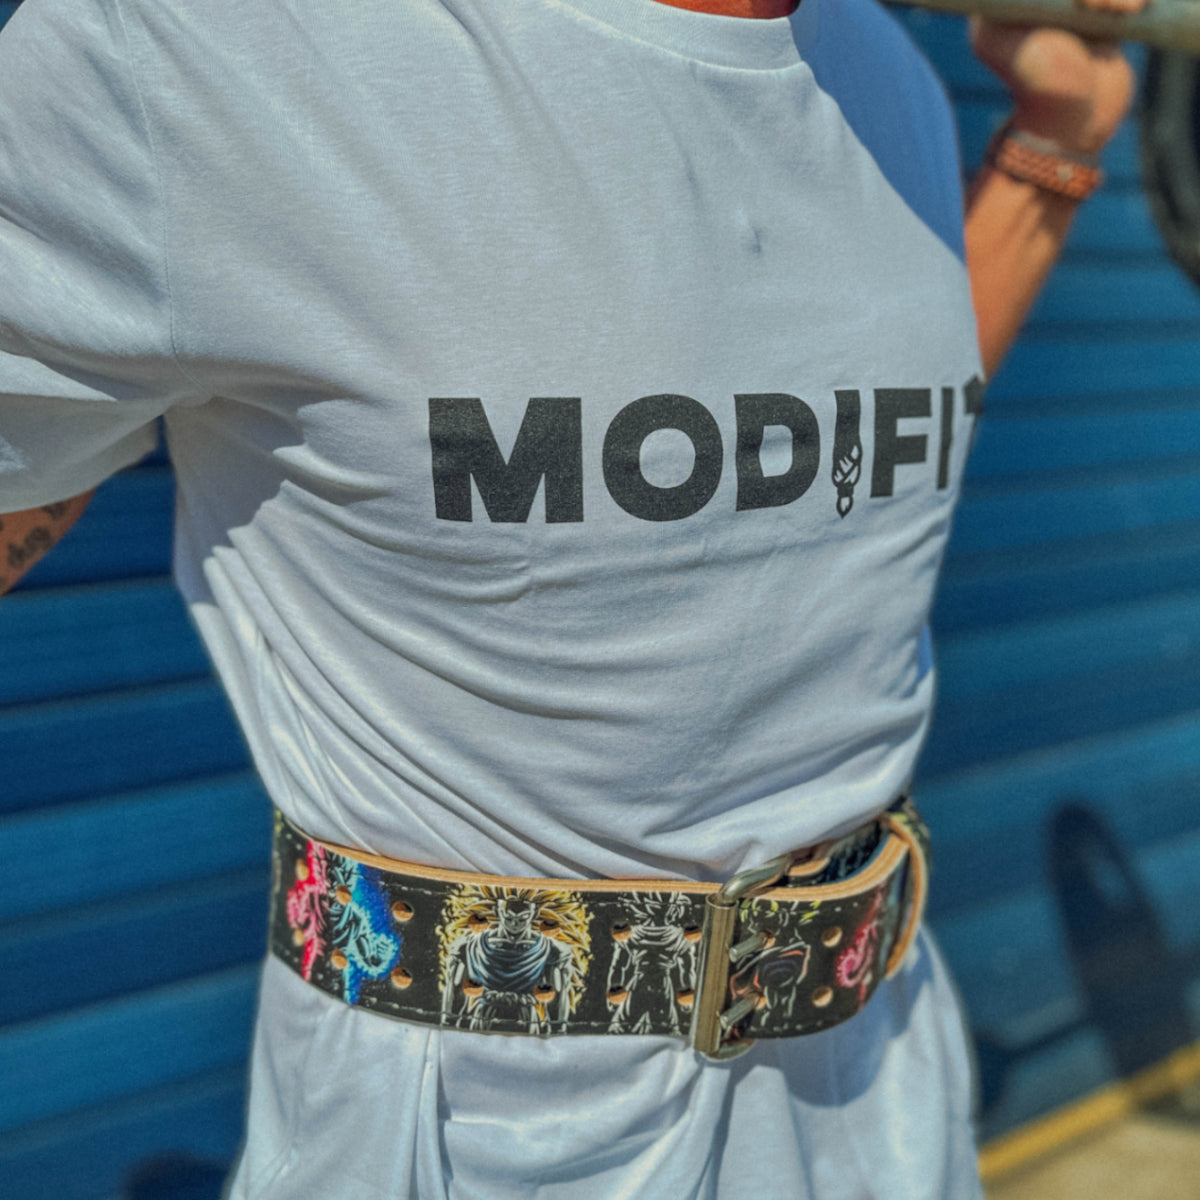 Goku Silhouette Weightlifting Belt - Hand Made in UK (CUSTOMISABLE)